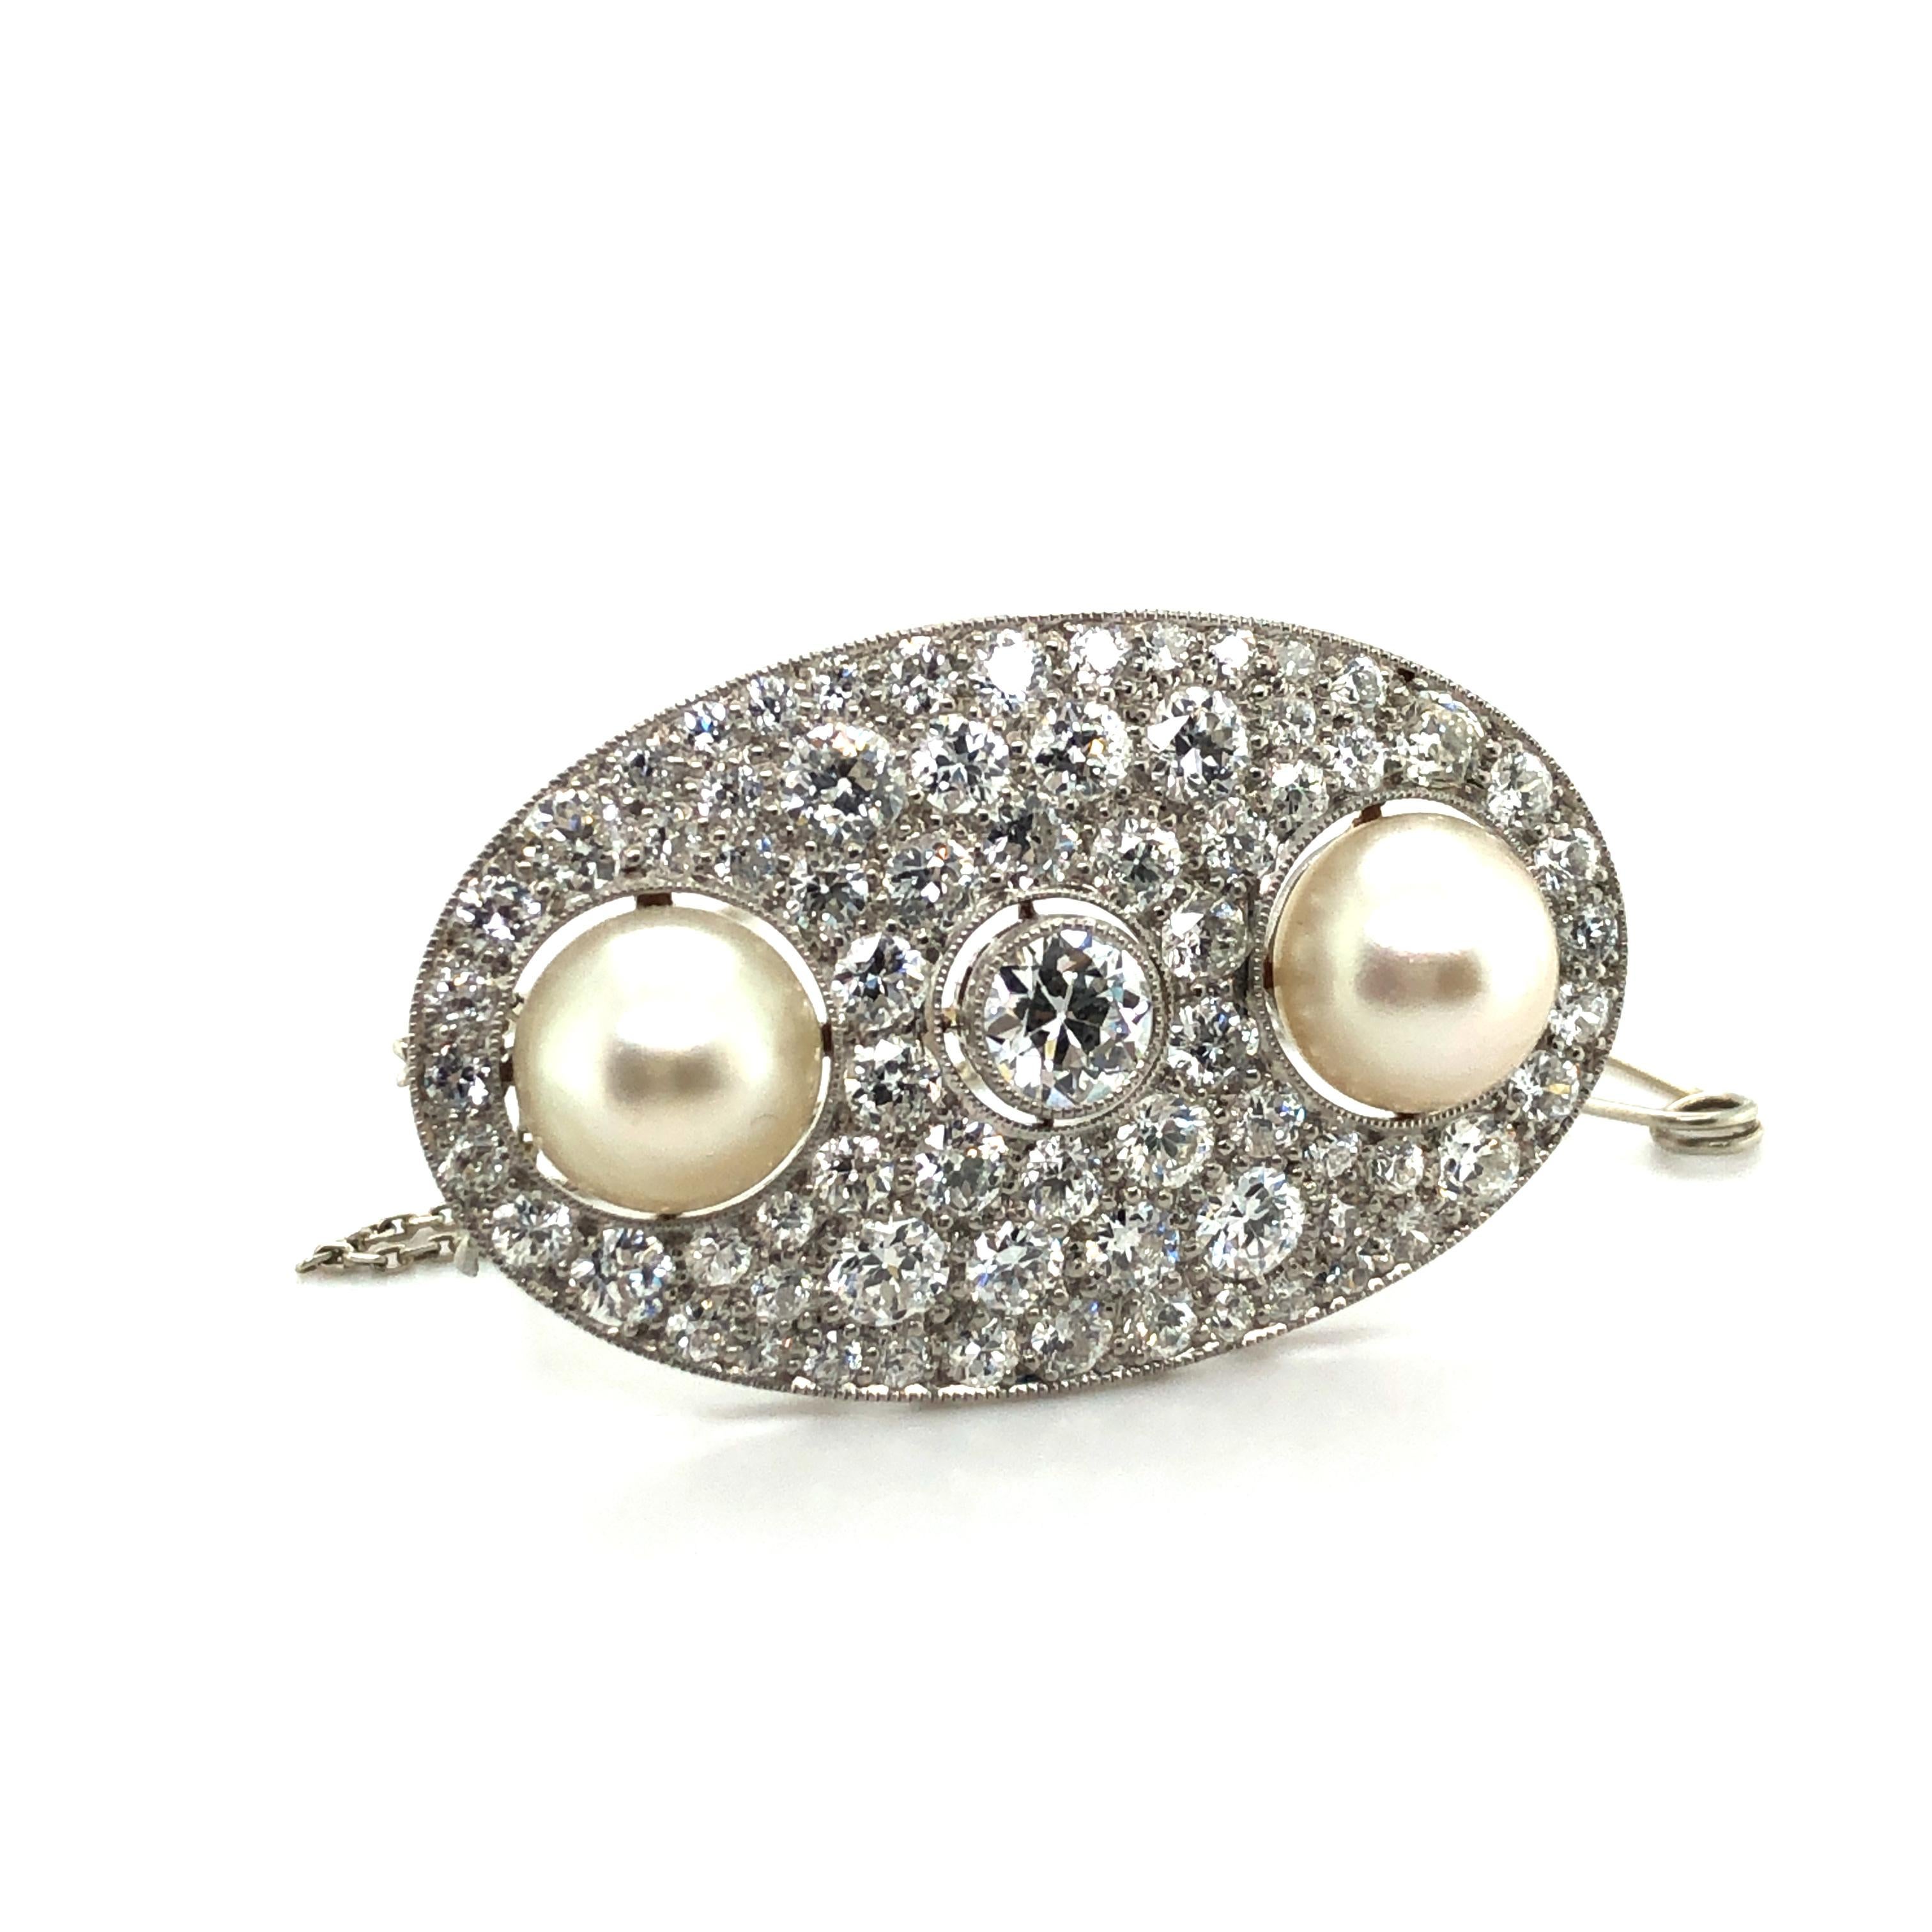 Old European Cut Certified Natural Pearl and Diamond Brooch in Platinum, ca. 1925